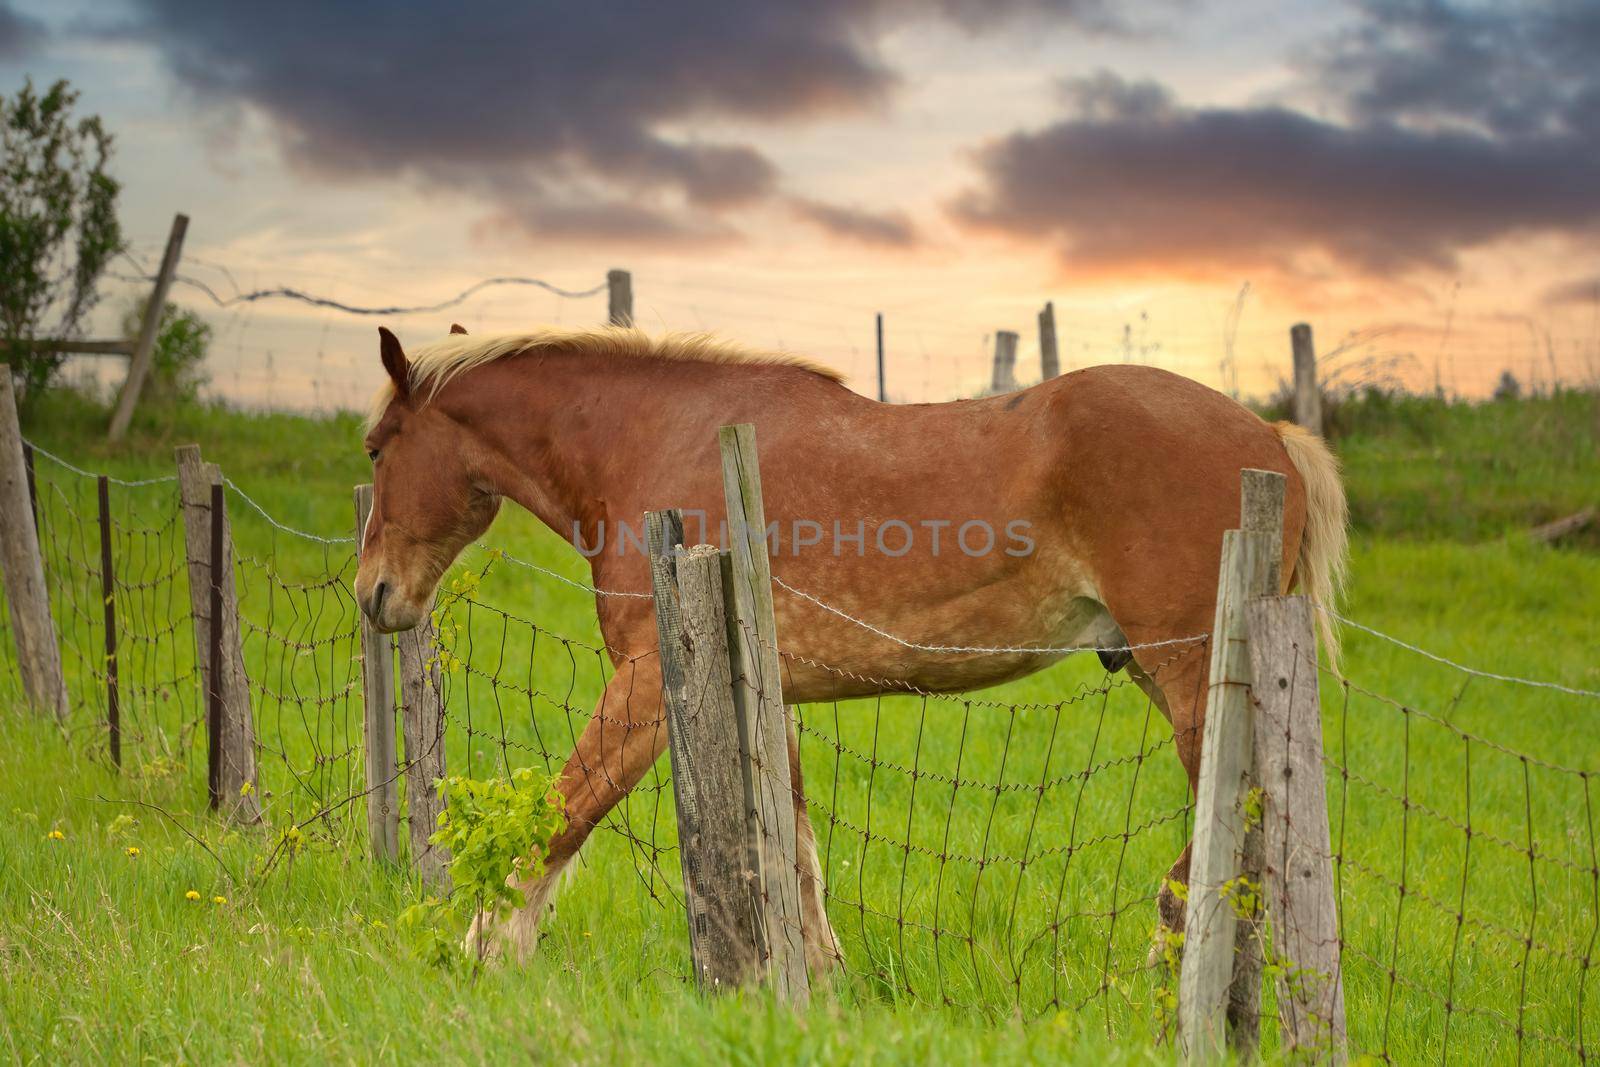 A Male Flaxen Chestnut Horse Stallion Colt with his Foot Caught in a Wire Fence Trying to Remove it by markvandam